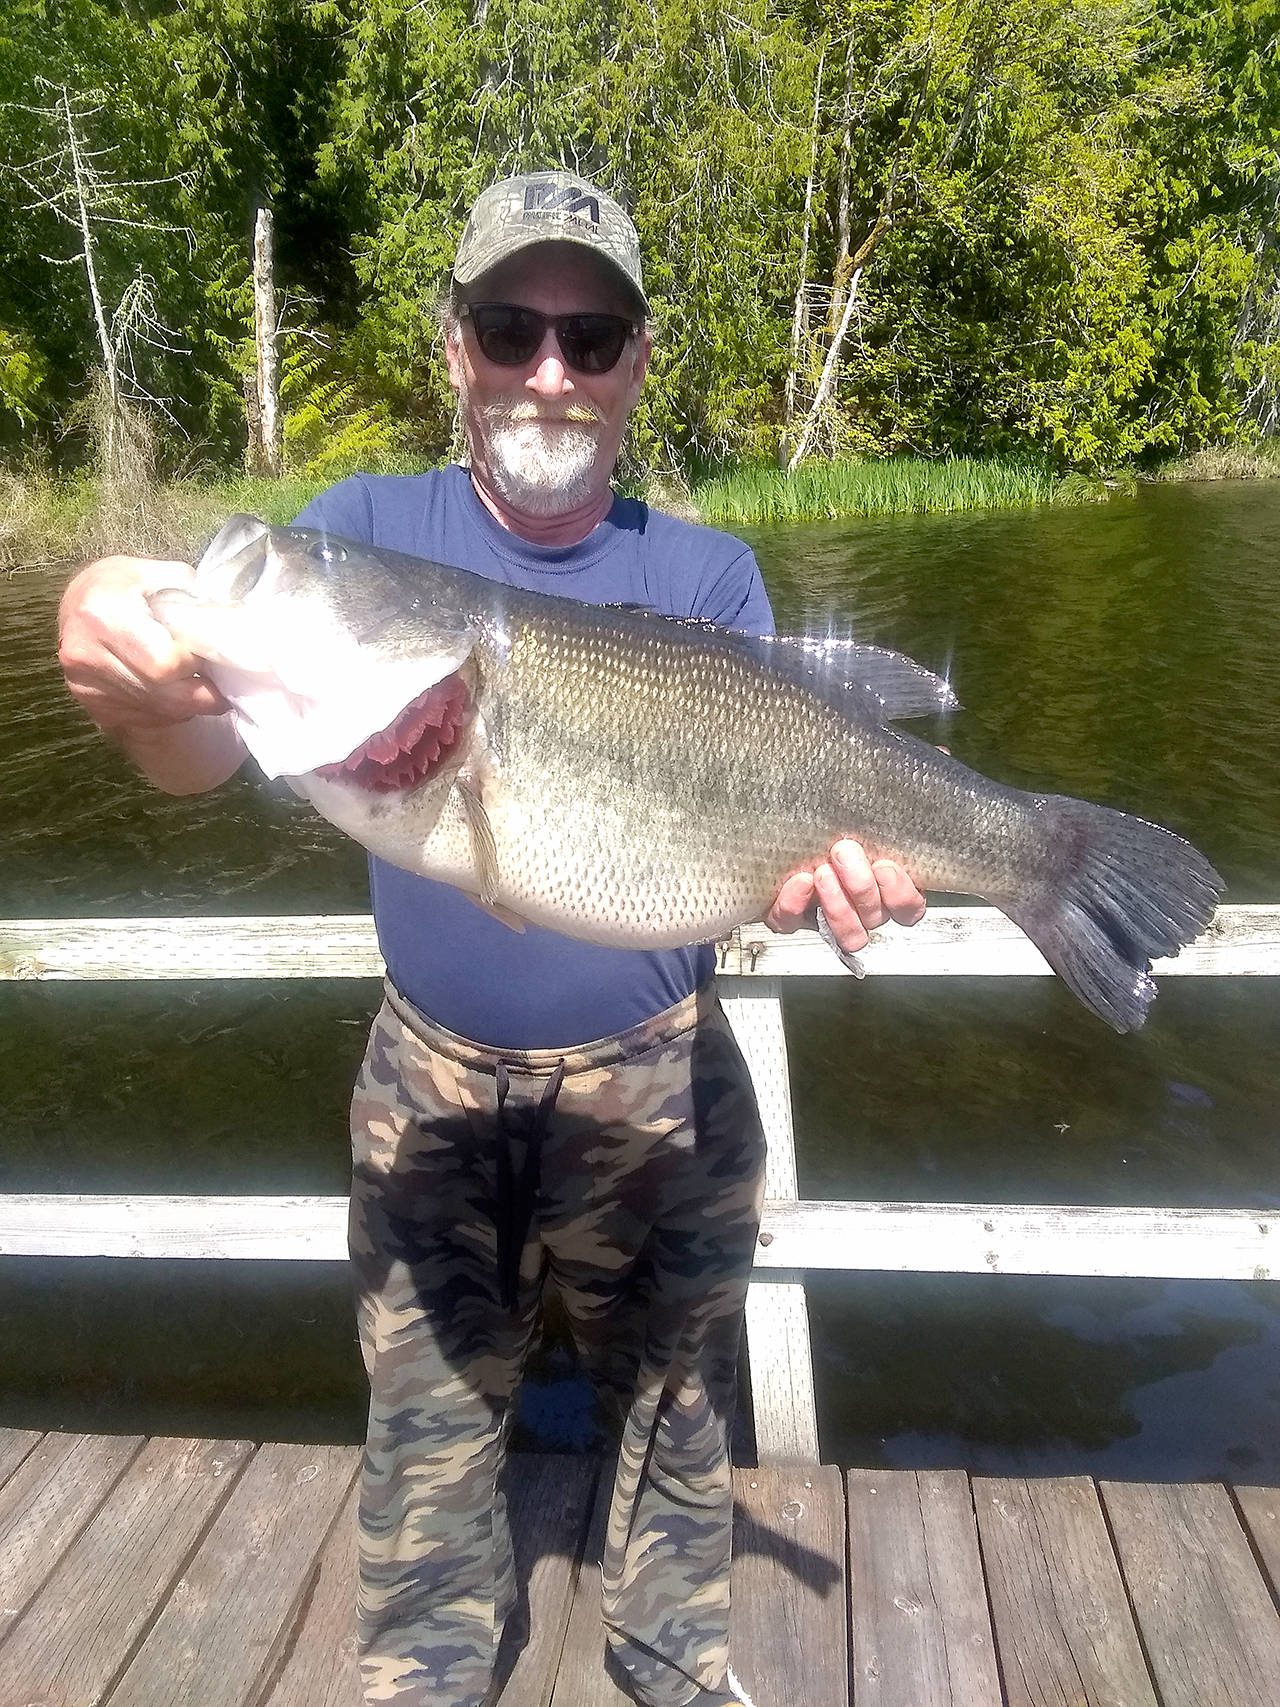 Russ Ridderbusch caught this 10.2-pound largemouth bass on Lake Leland in May using a classic Bass Oreno lure.